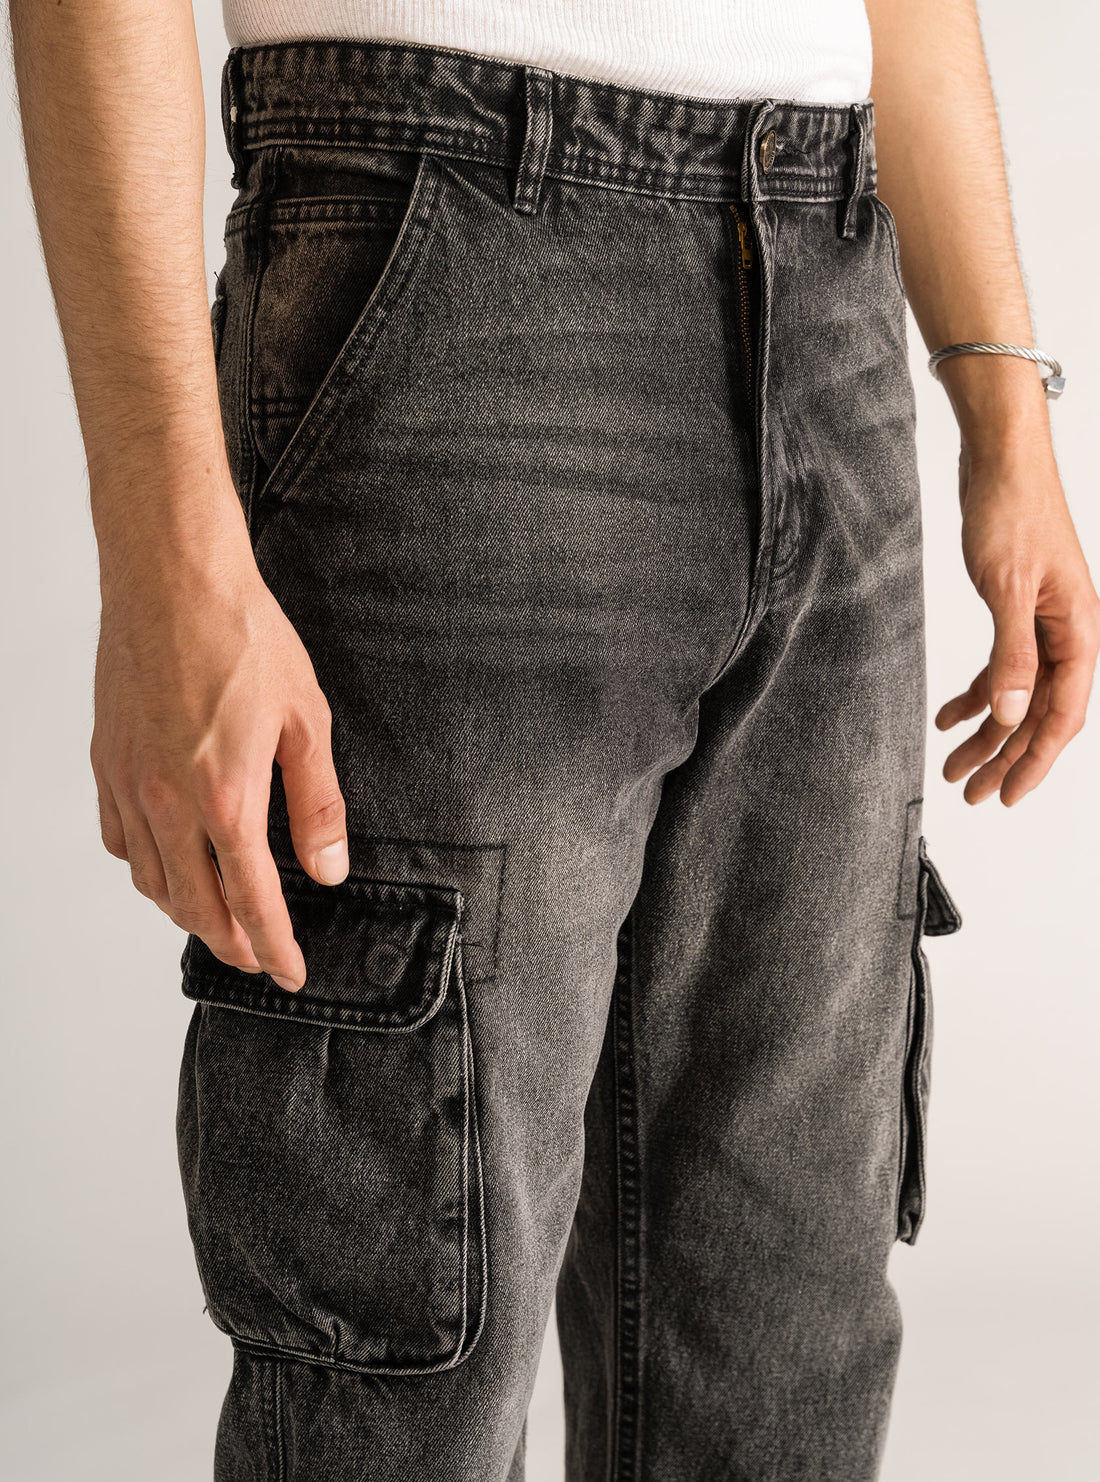 Light My Fire Cargo Jeans, Gris Obscuro